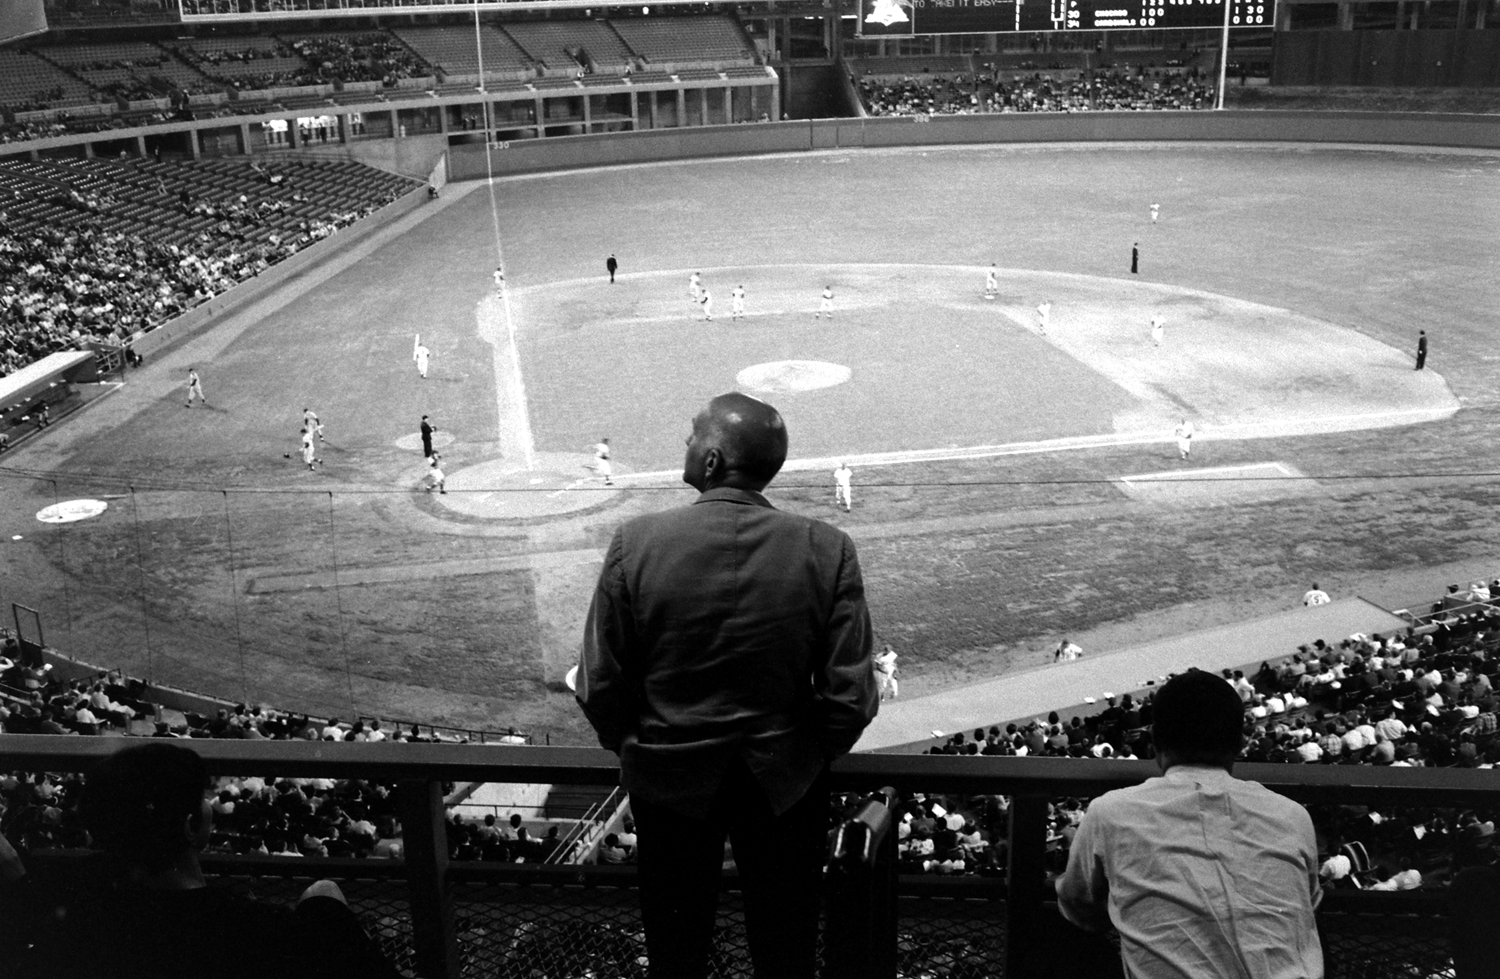 Dr. William Masters at a Cardinals game, 1966.